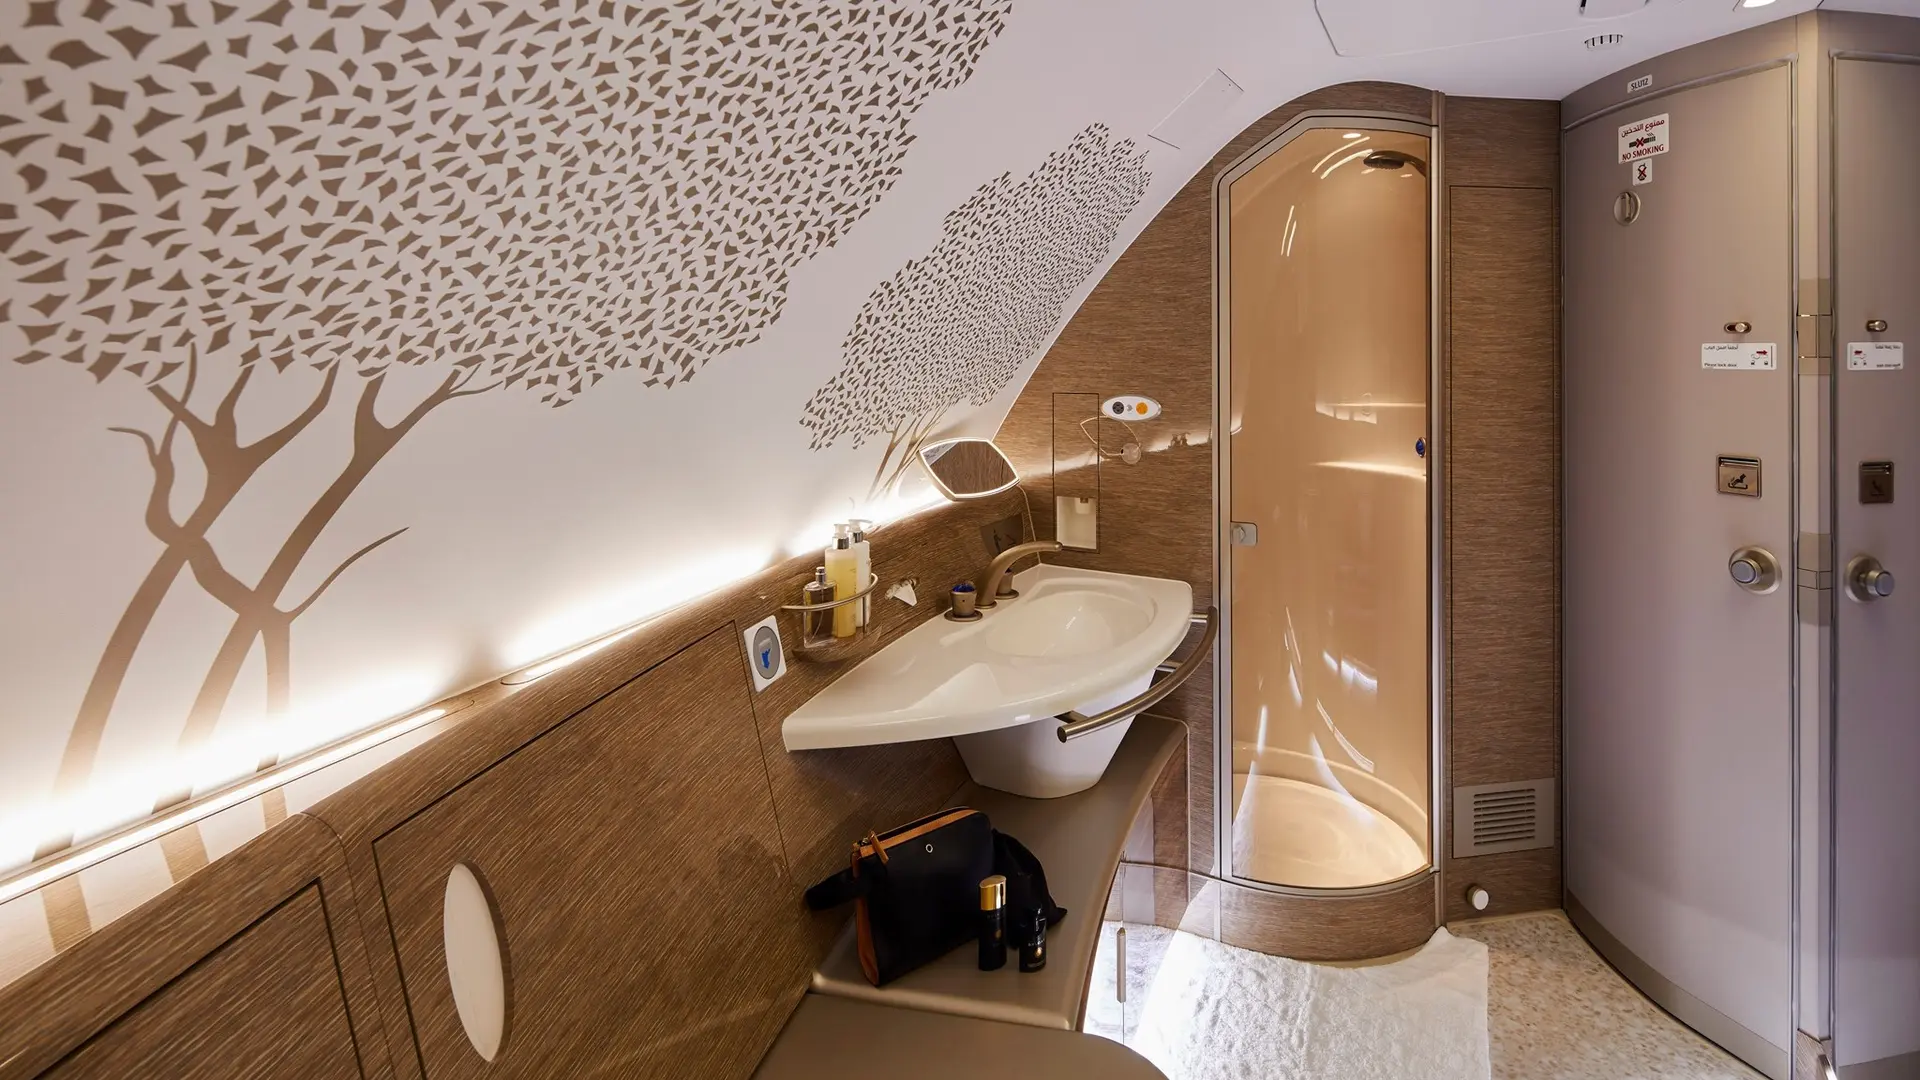 Airline review Amenities & Facilities - Emirates - 2